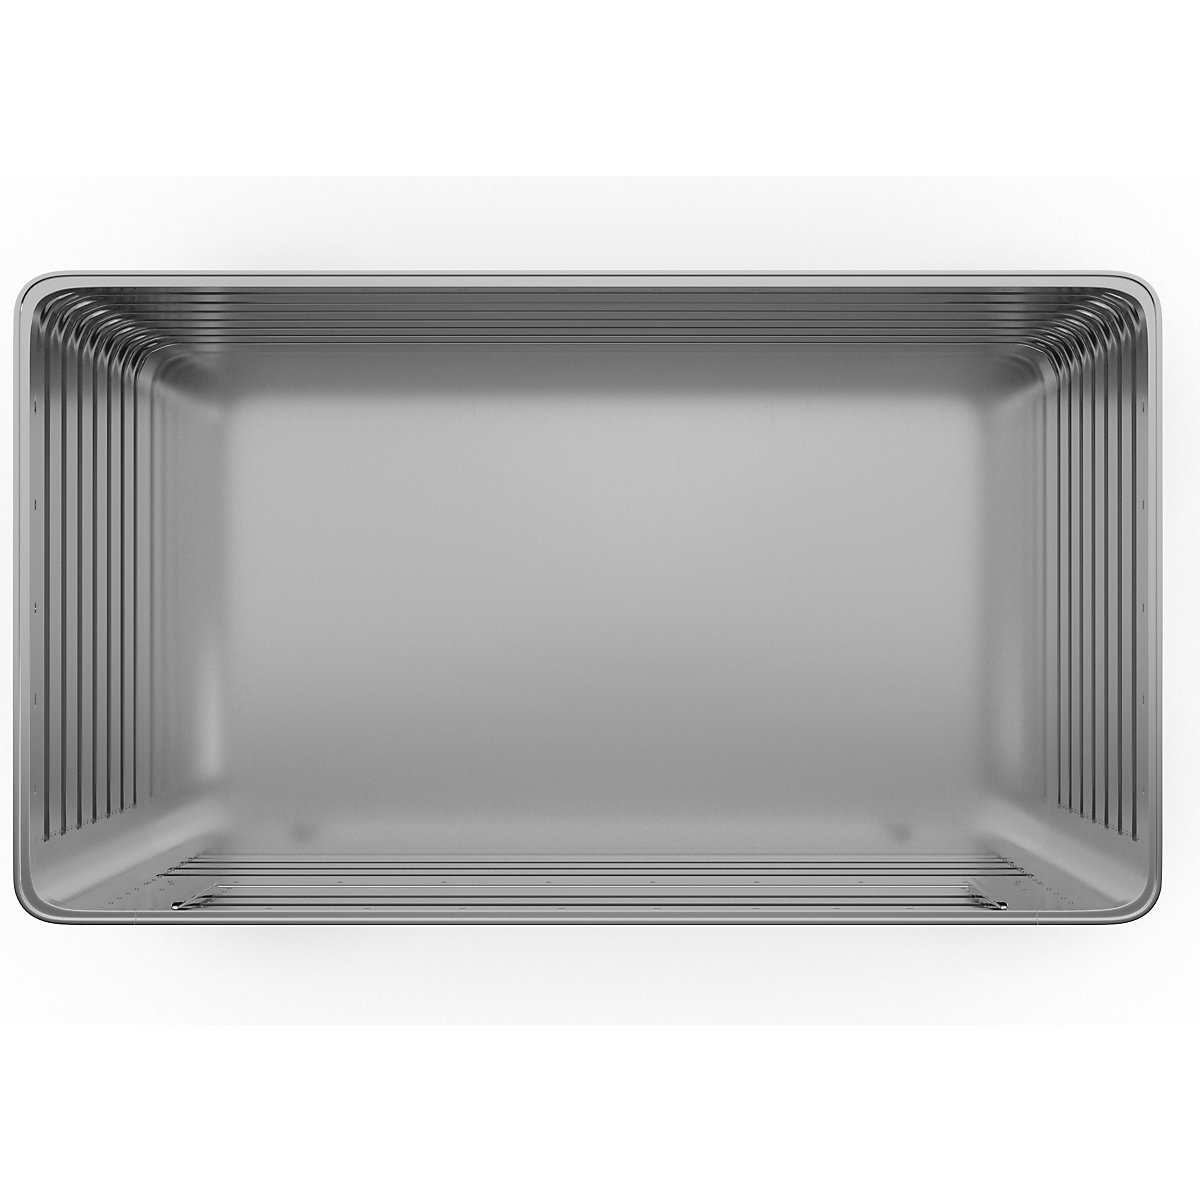 Aluminium container truck, drop gate on side panel – Gmöhling (Product illustration 4)-3